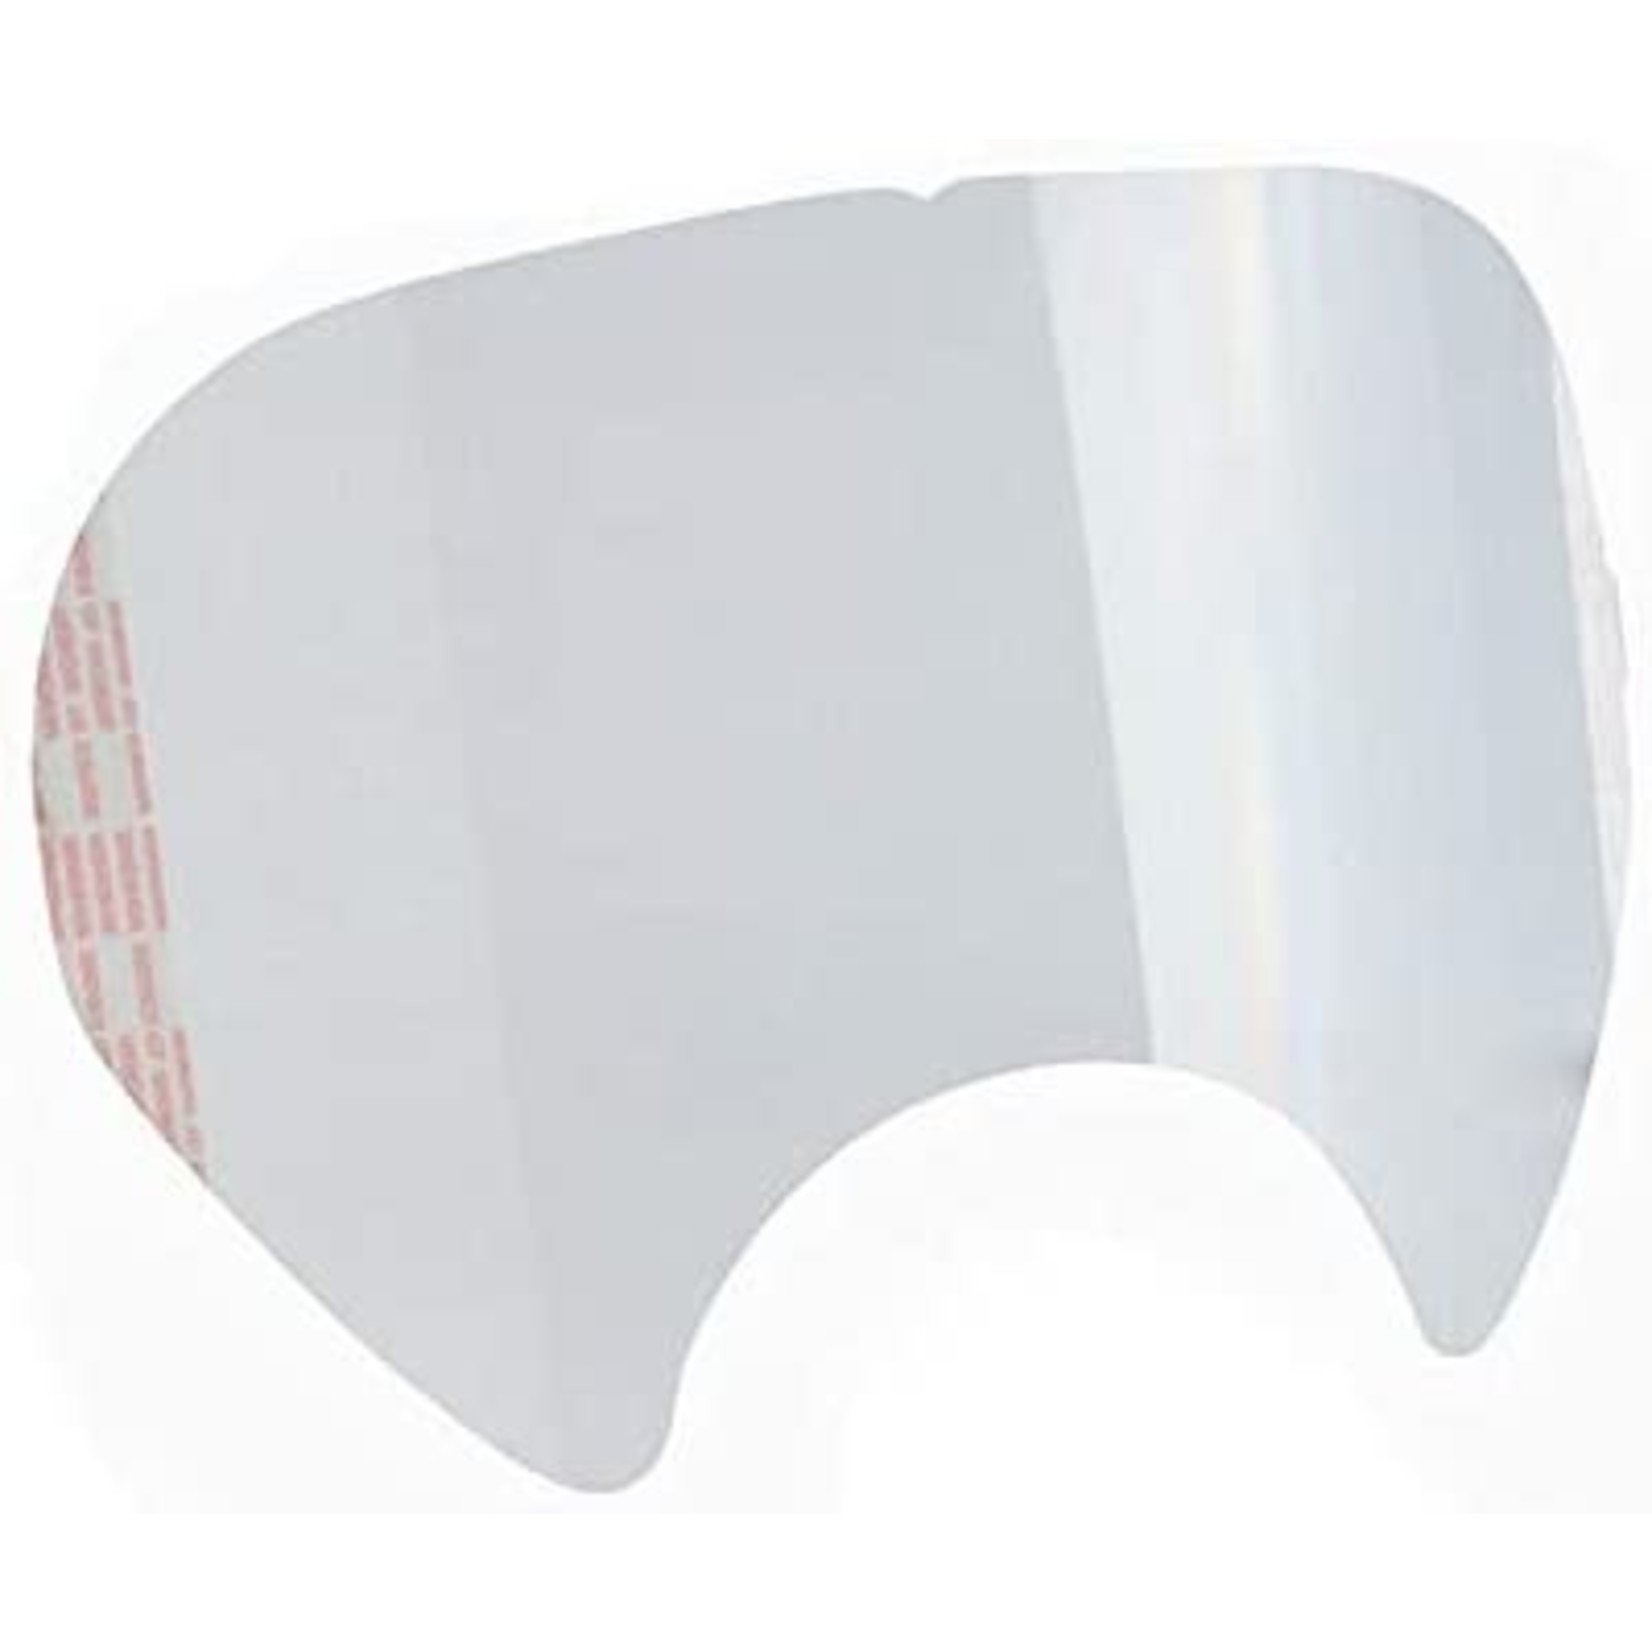 3M Tear-Off Faceshield Cover for 6000 Series Respirators  (25 Count)